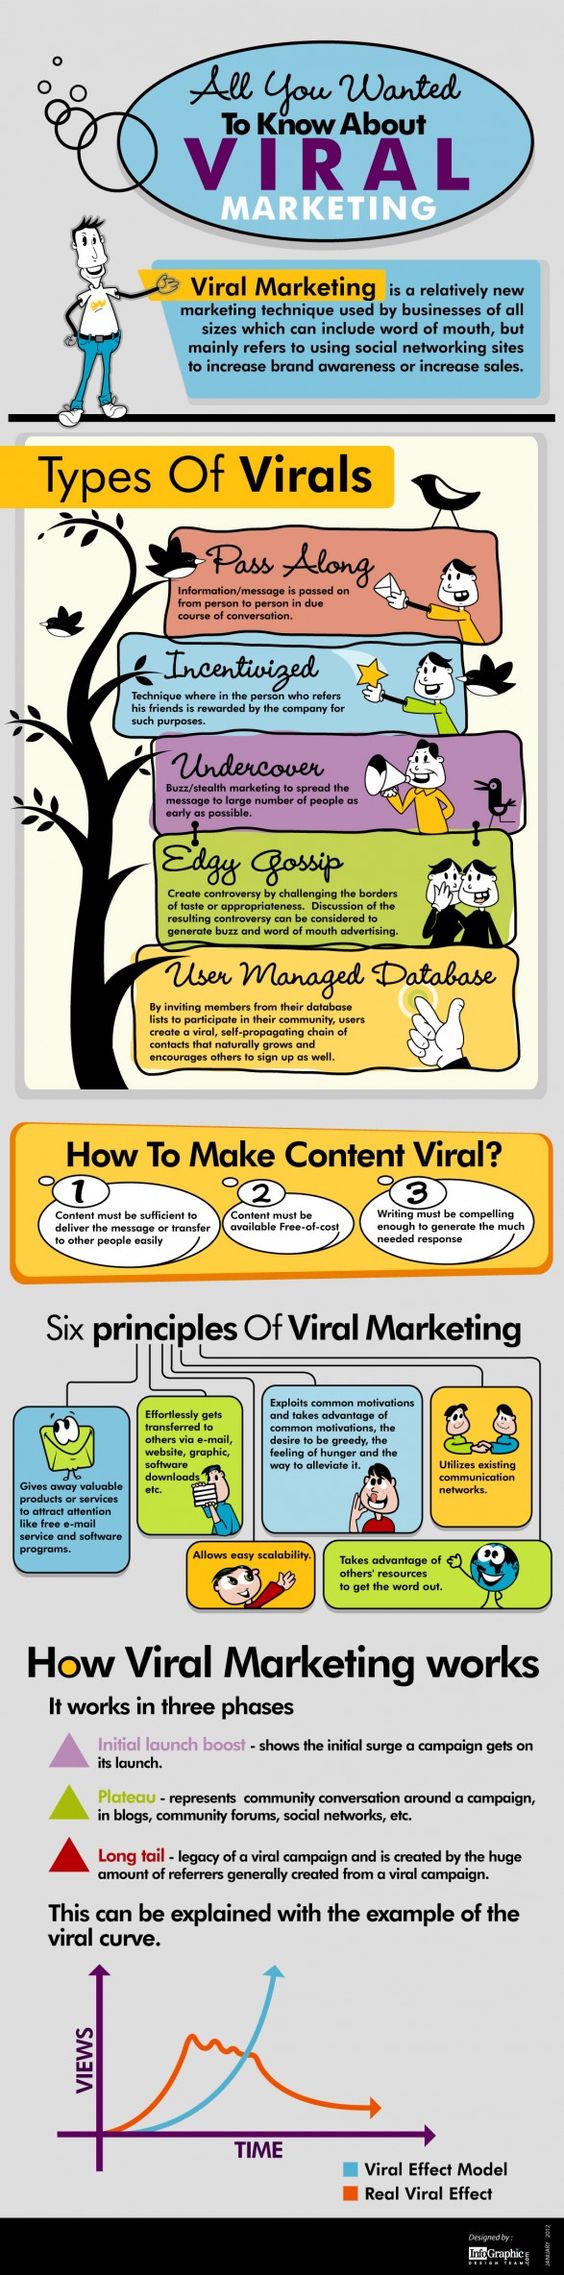 All You Wanted To Know About Viral Marketing [Infographic]